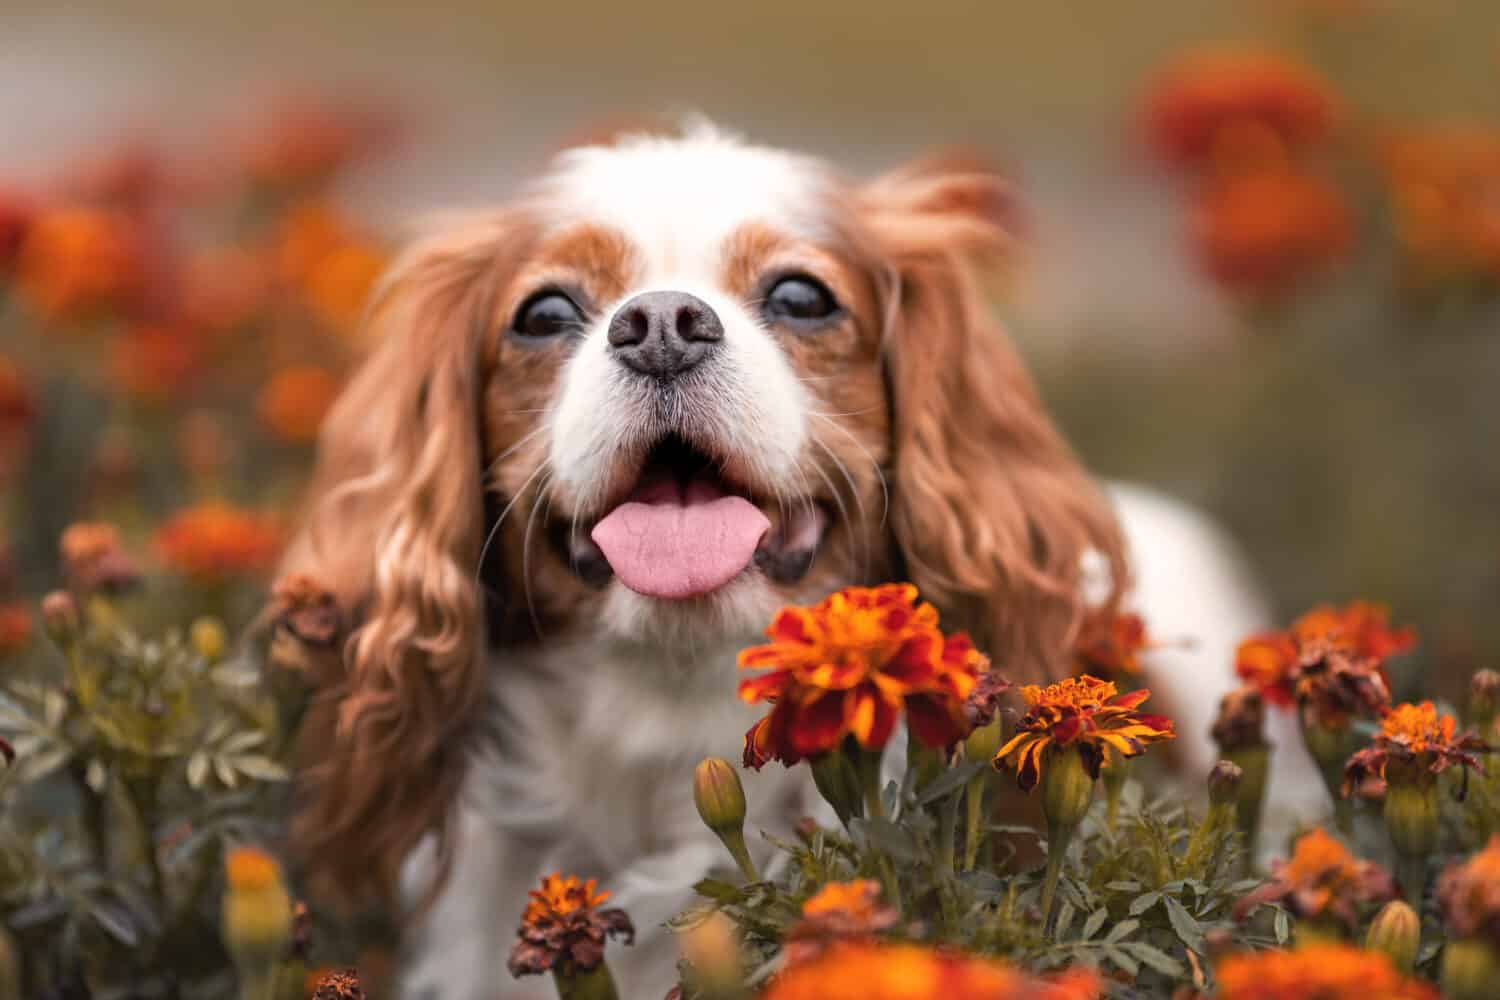 Cute cavalier king charles dog with tongue out among orange flowers. Close up pet portrait 